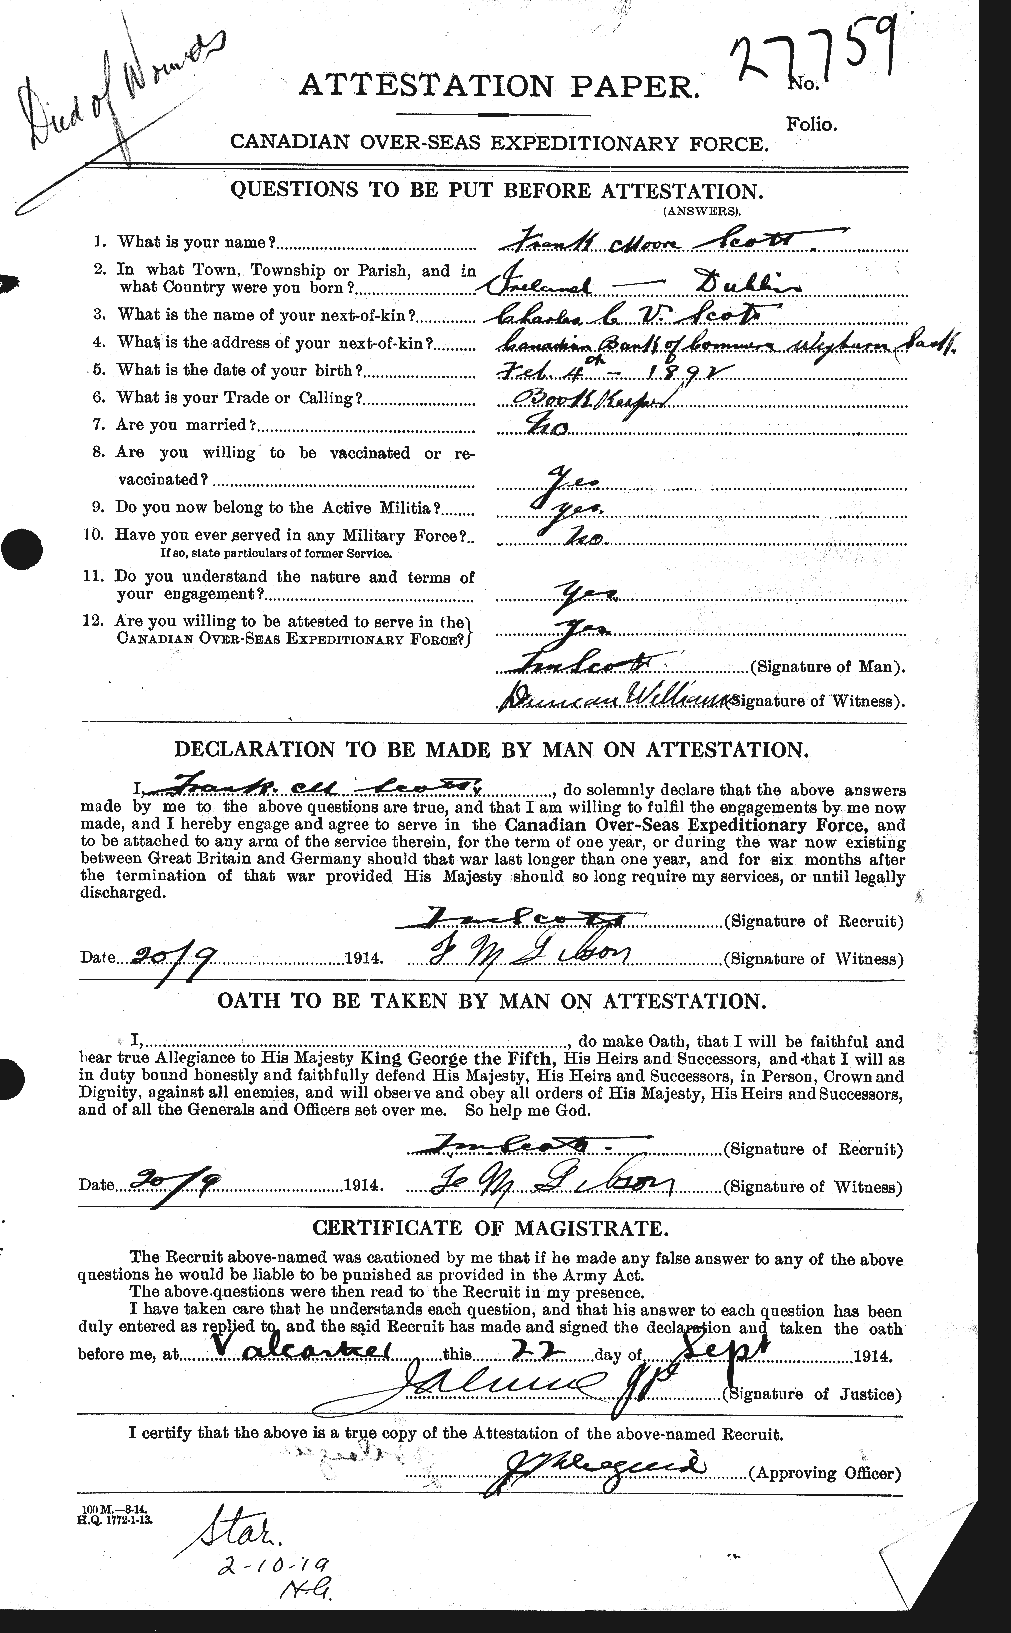 Personnel Records of the First World War - CEF 084696a